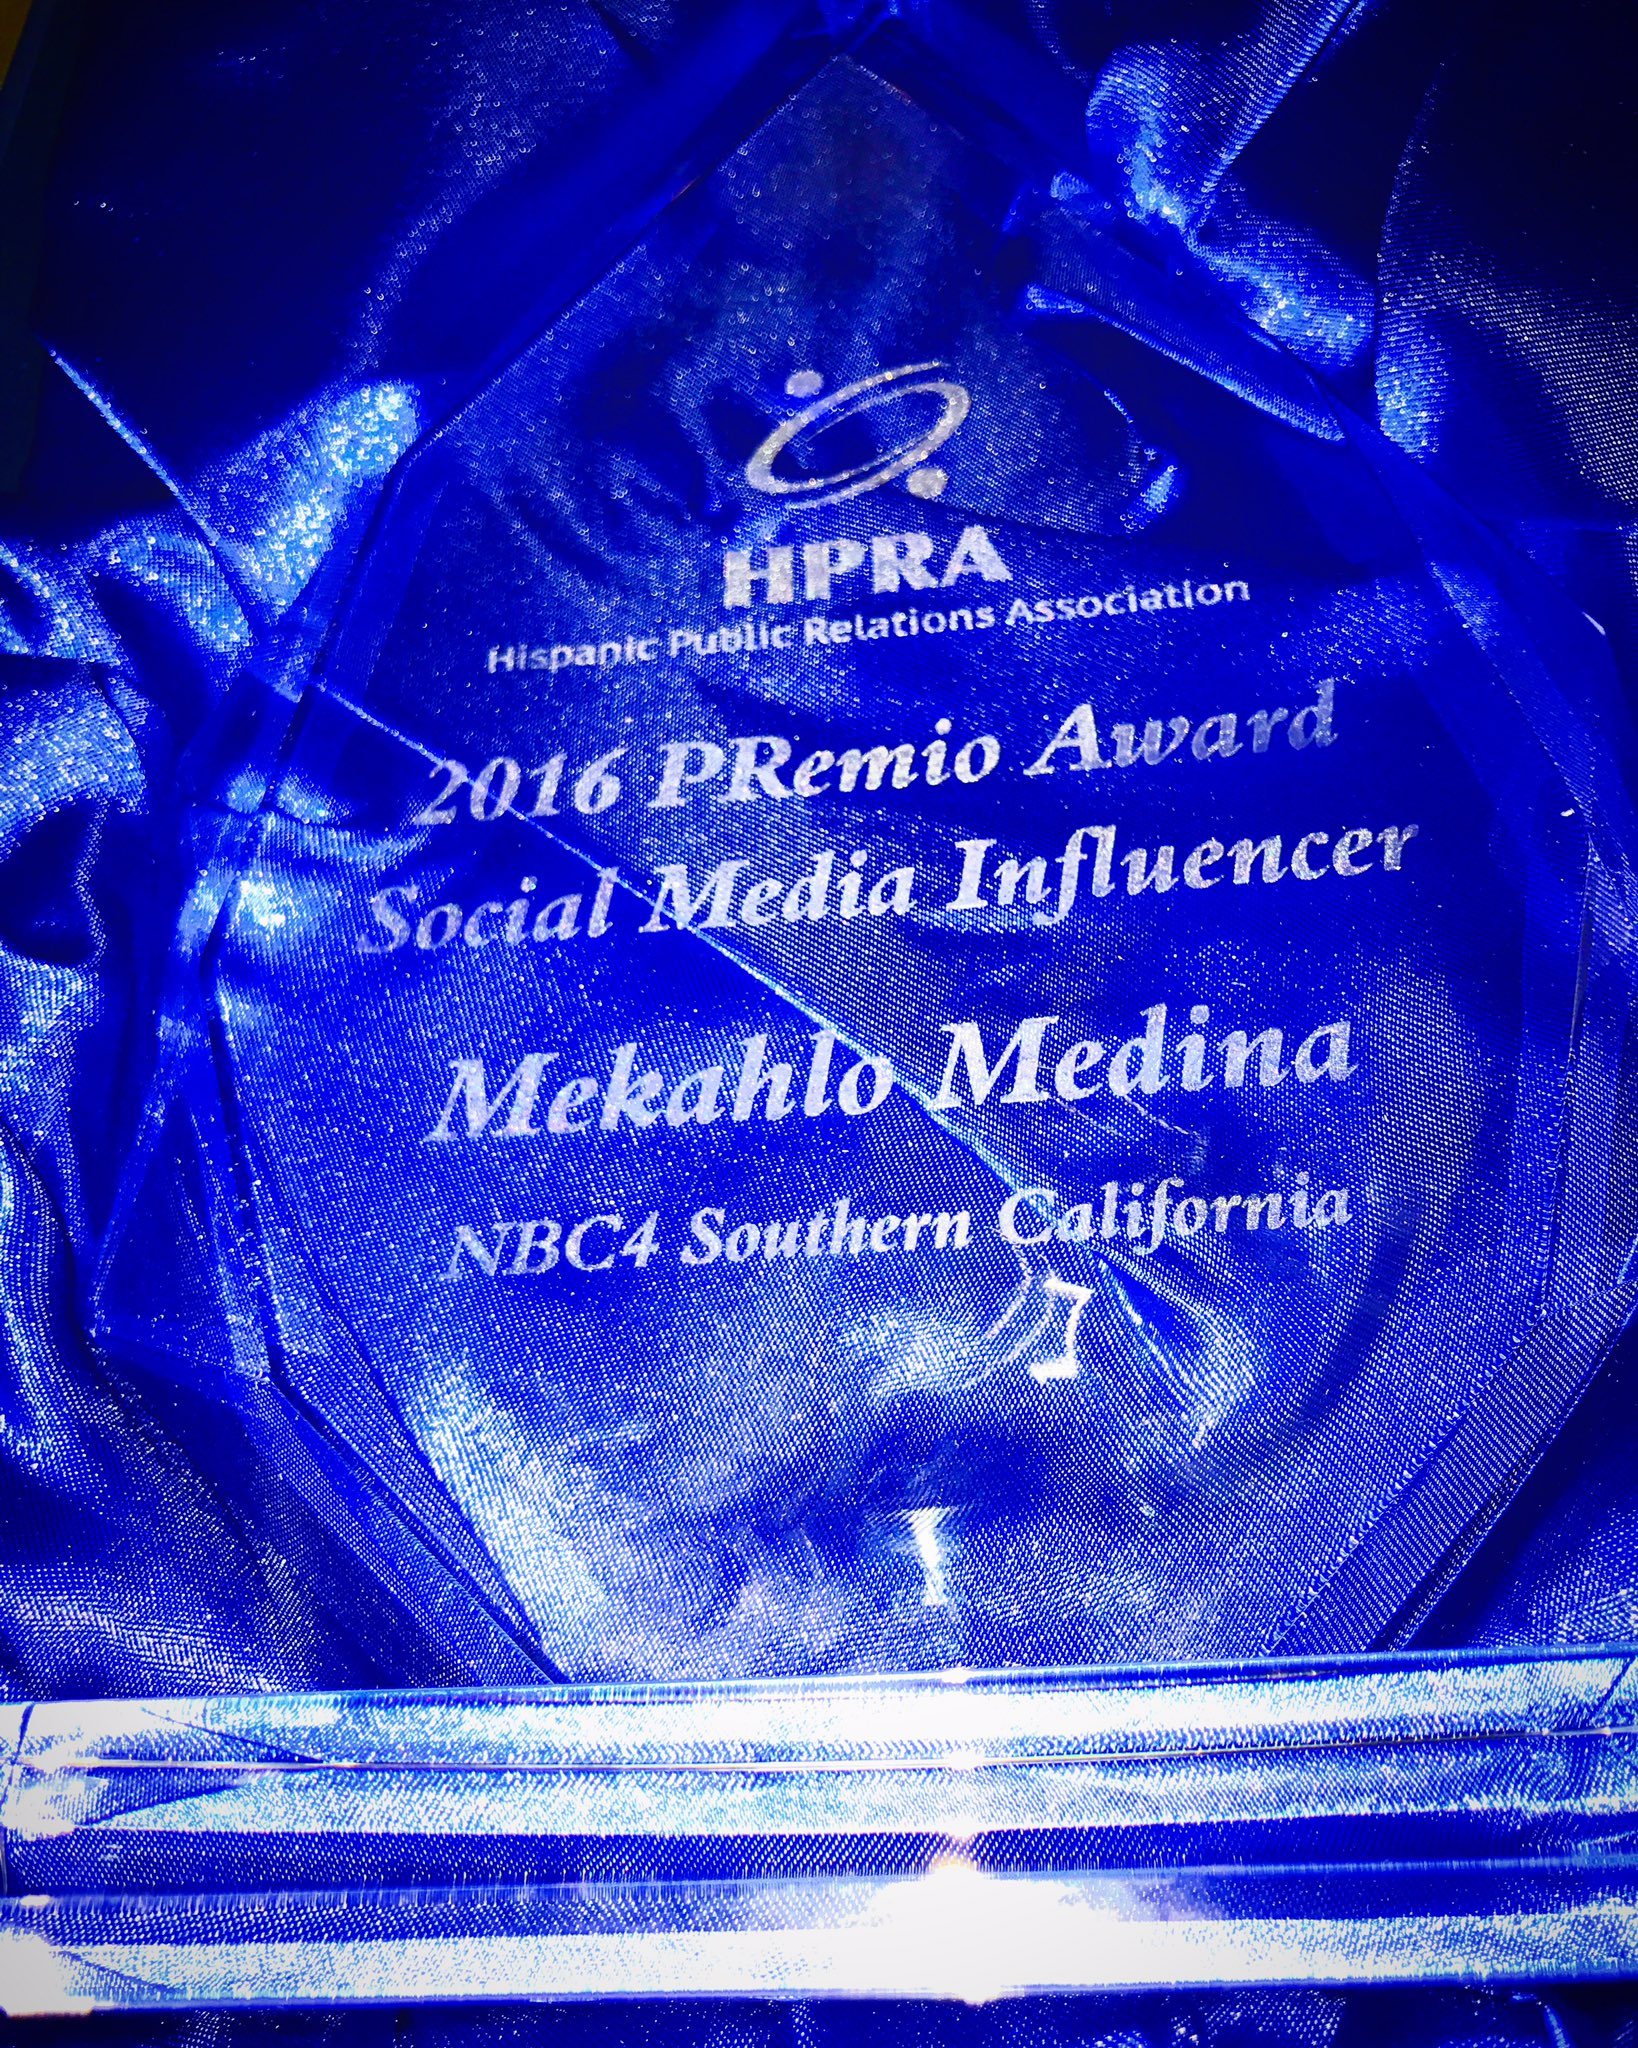 Mekahlo Medina on Twitter: "Honored to received the #PRemio16 award